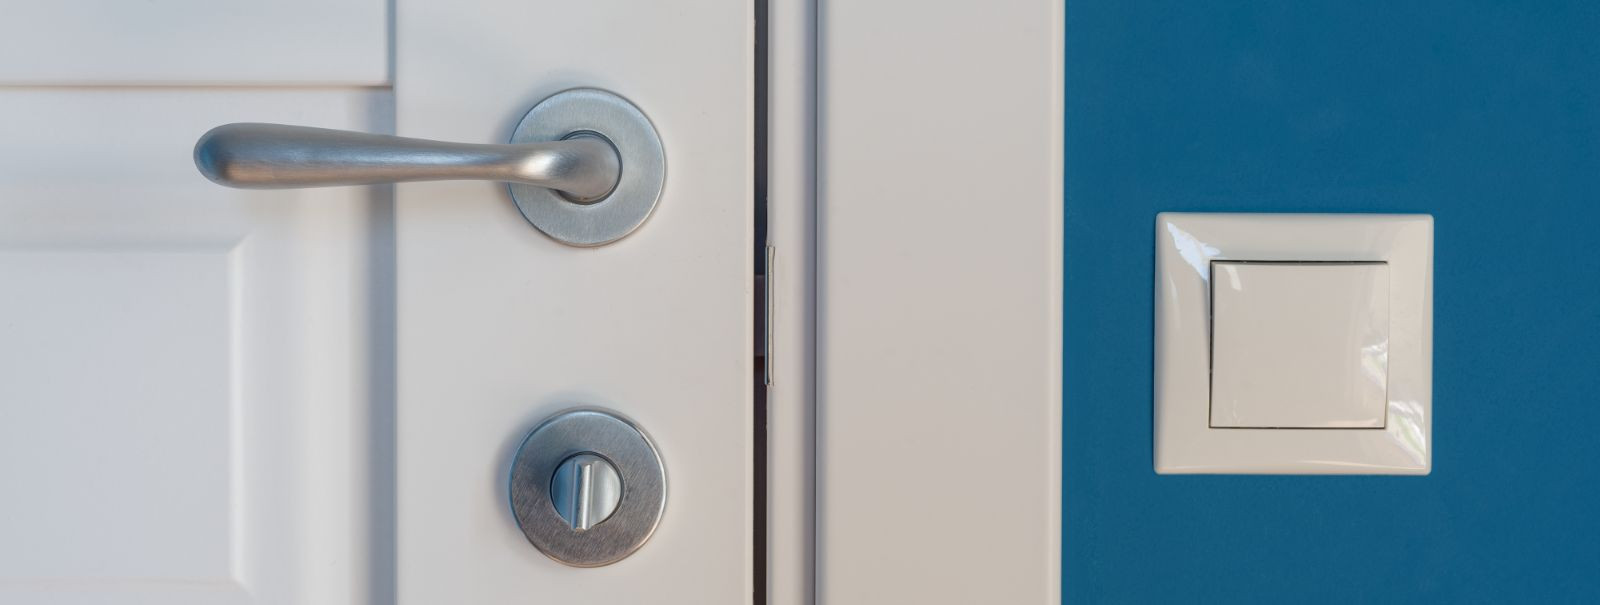 At the heart of every secure and stylish space lies a foundation of reliable locking mechanisms and sleek design. For years, we have been at the forefront of pr